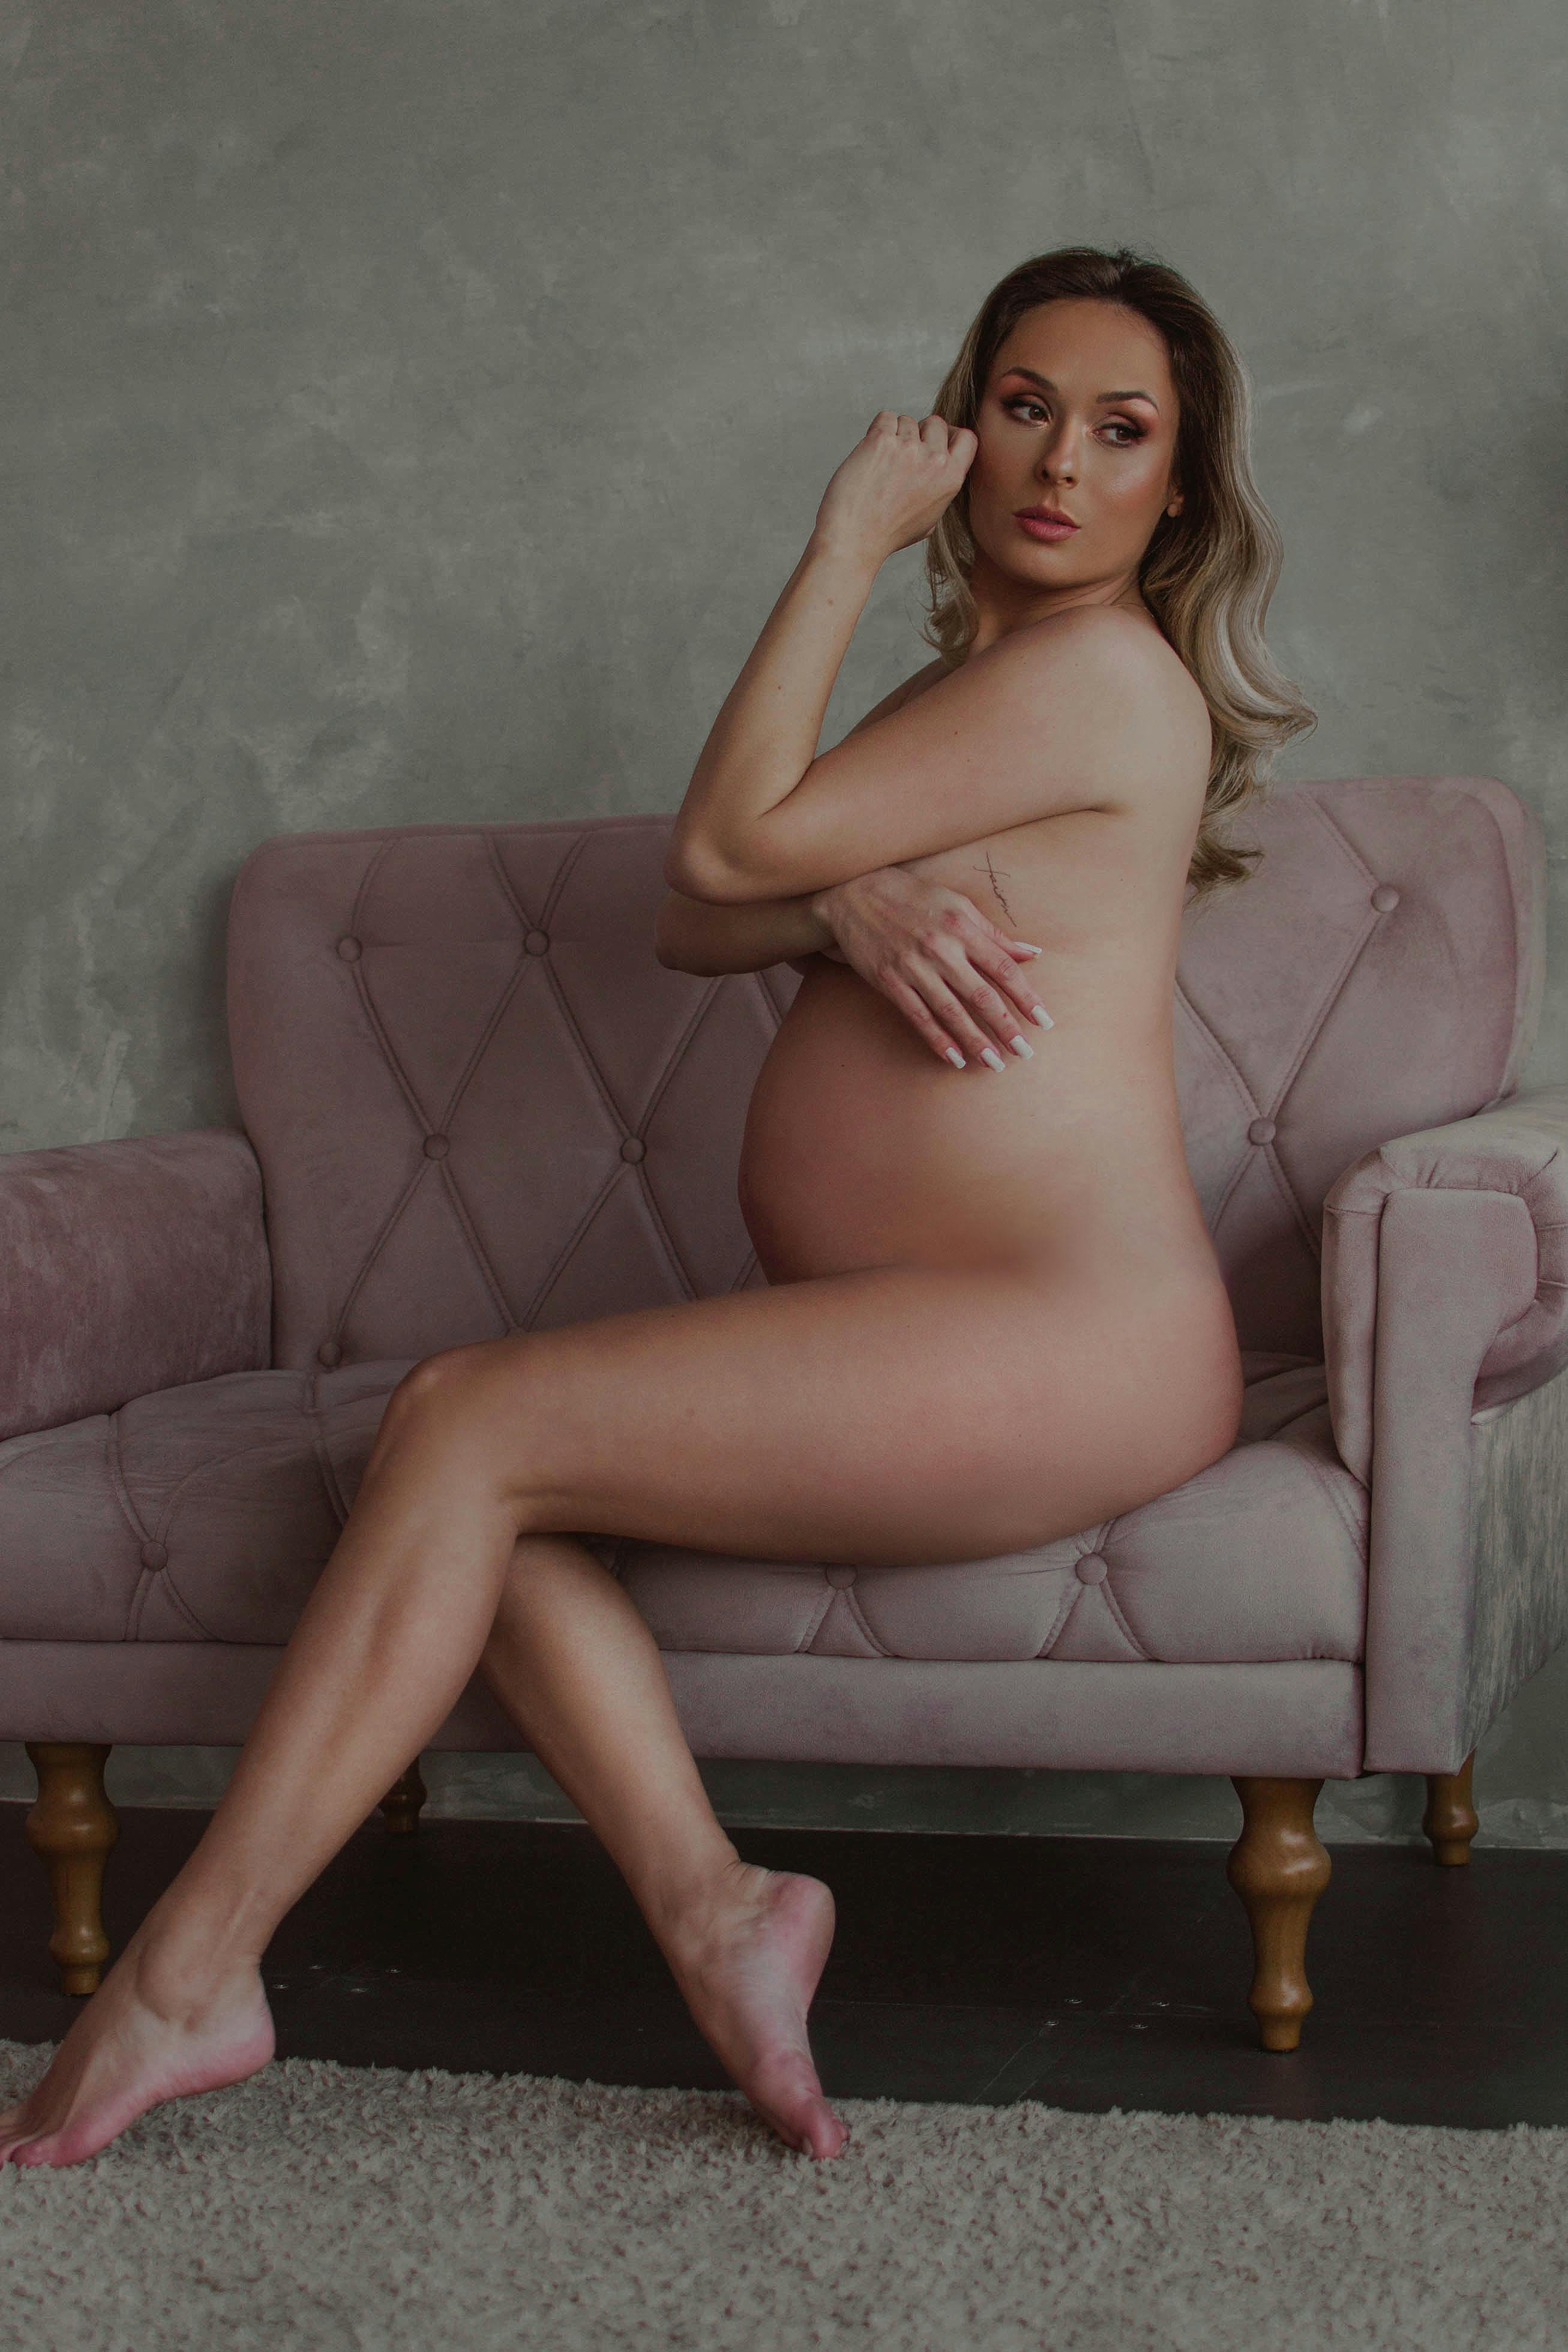 Happy Pregnant Naked - Naked Pregnant Woman Sitting on Pink Couch Â· Free Stock Photo